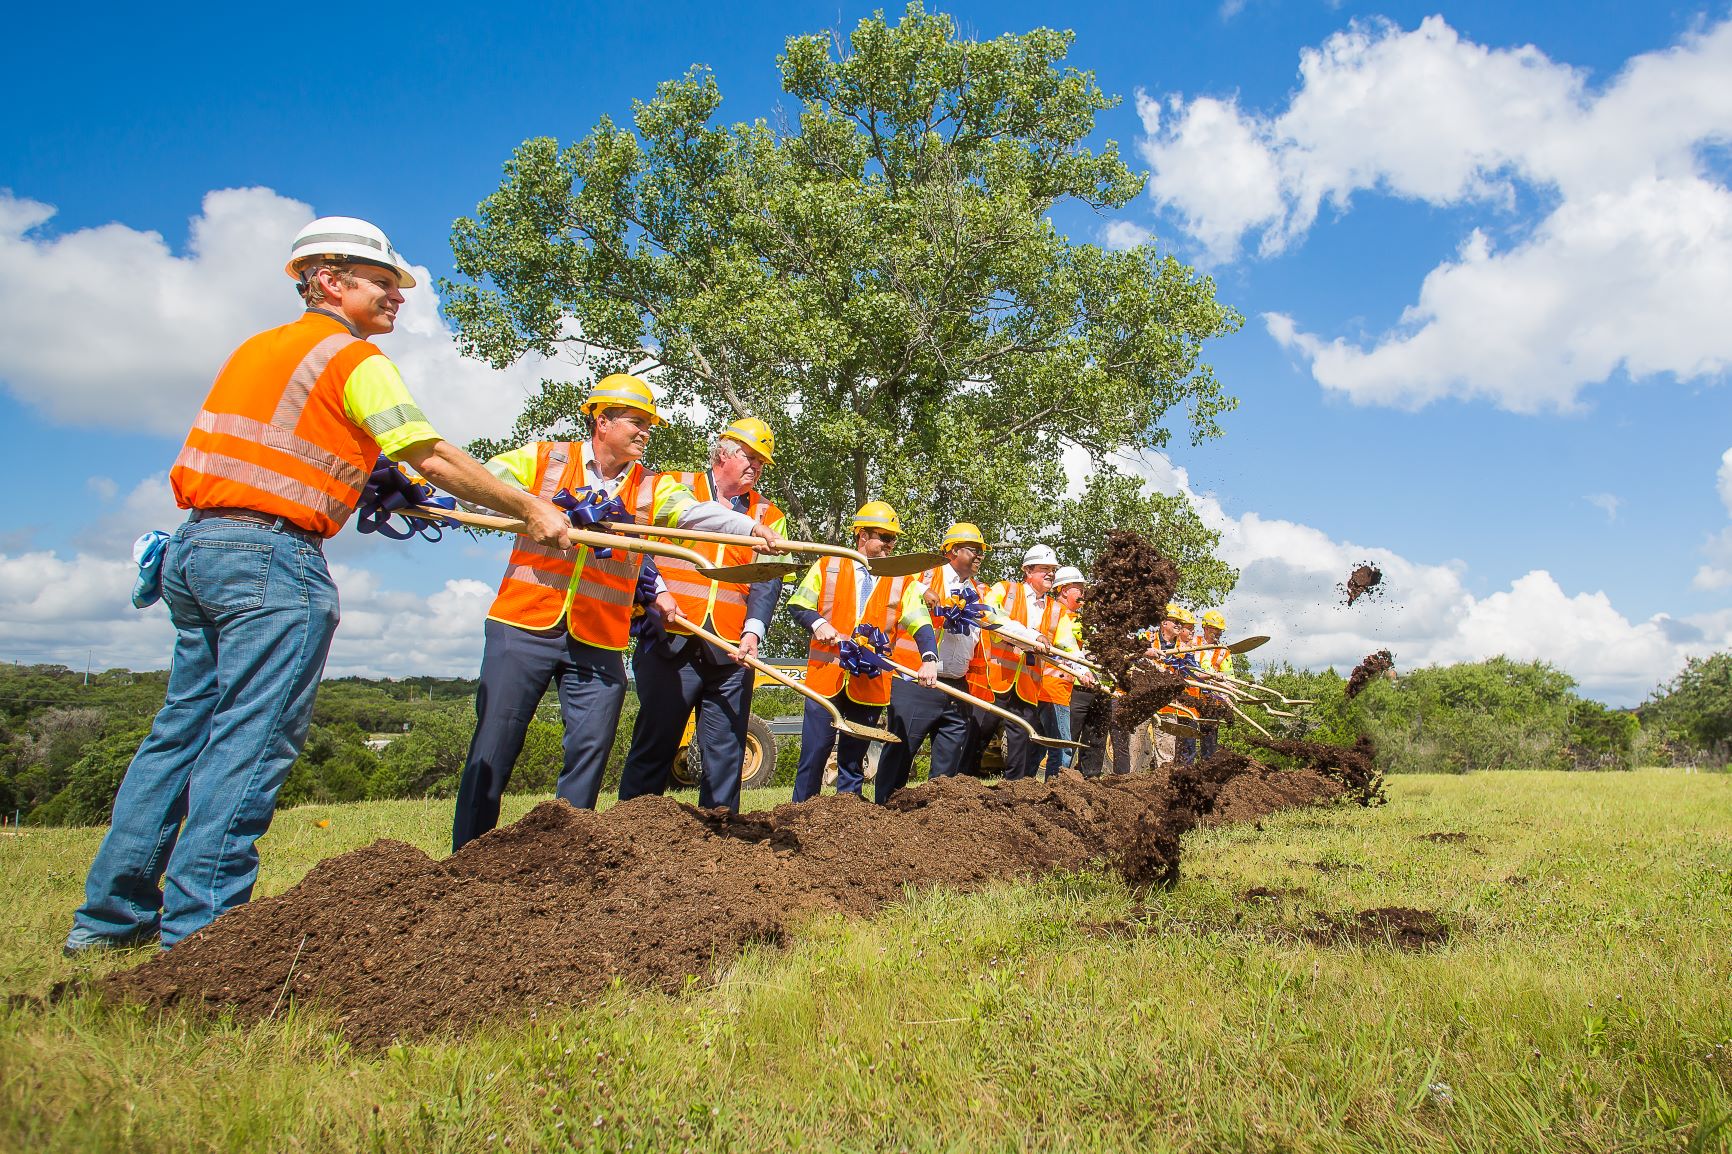 TxDOT officially began construction on the Oak Hill Parkway project with the turn of shovels, July 2021